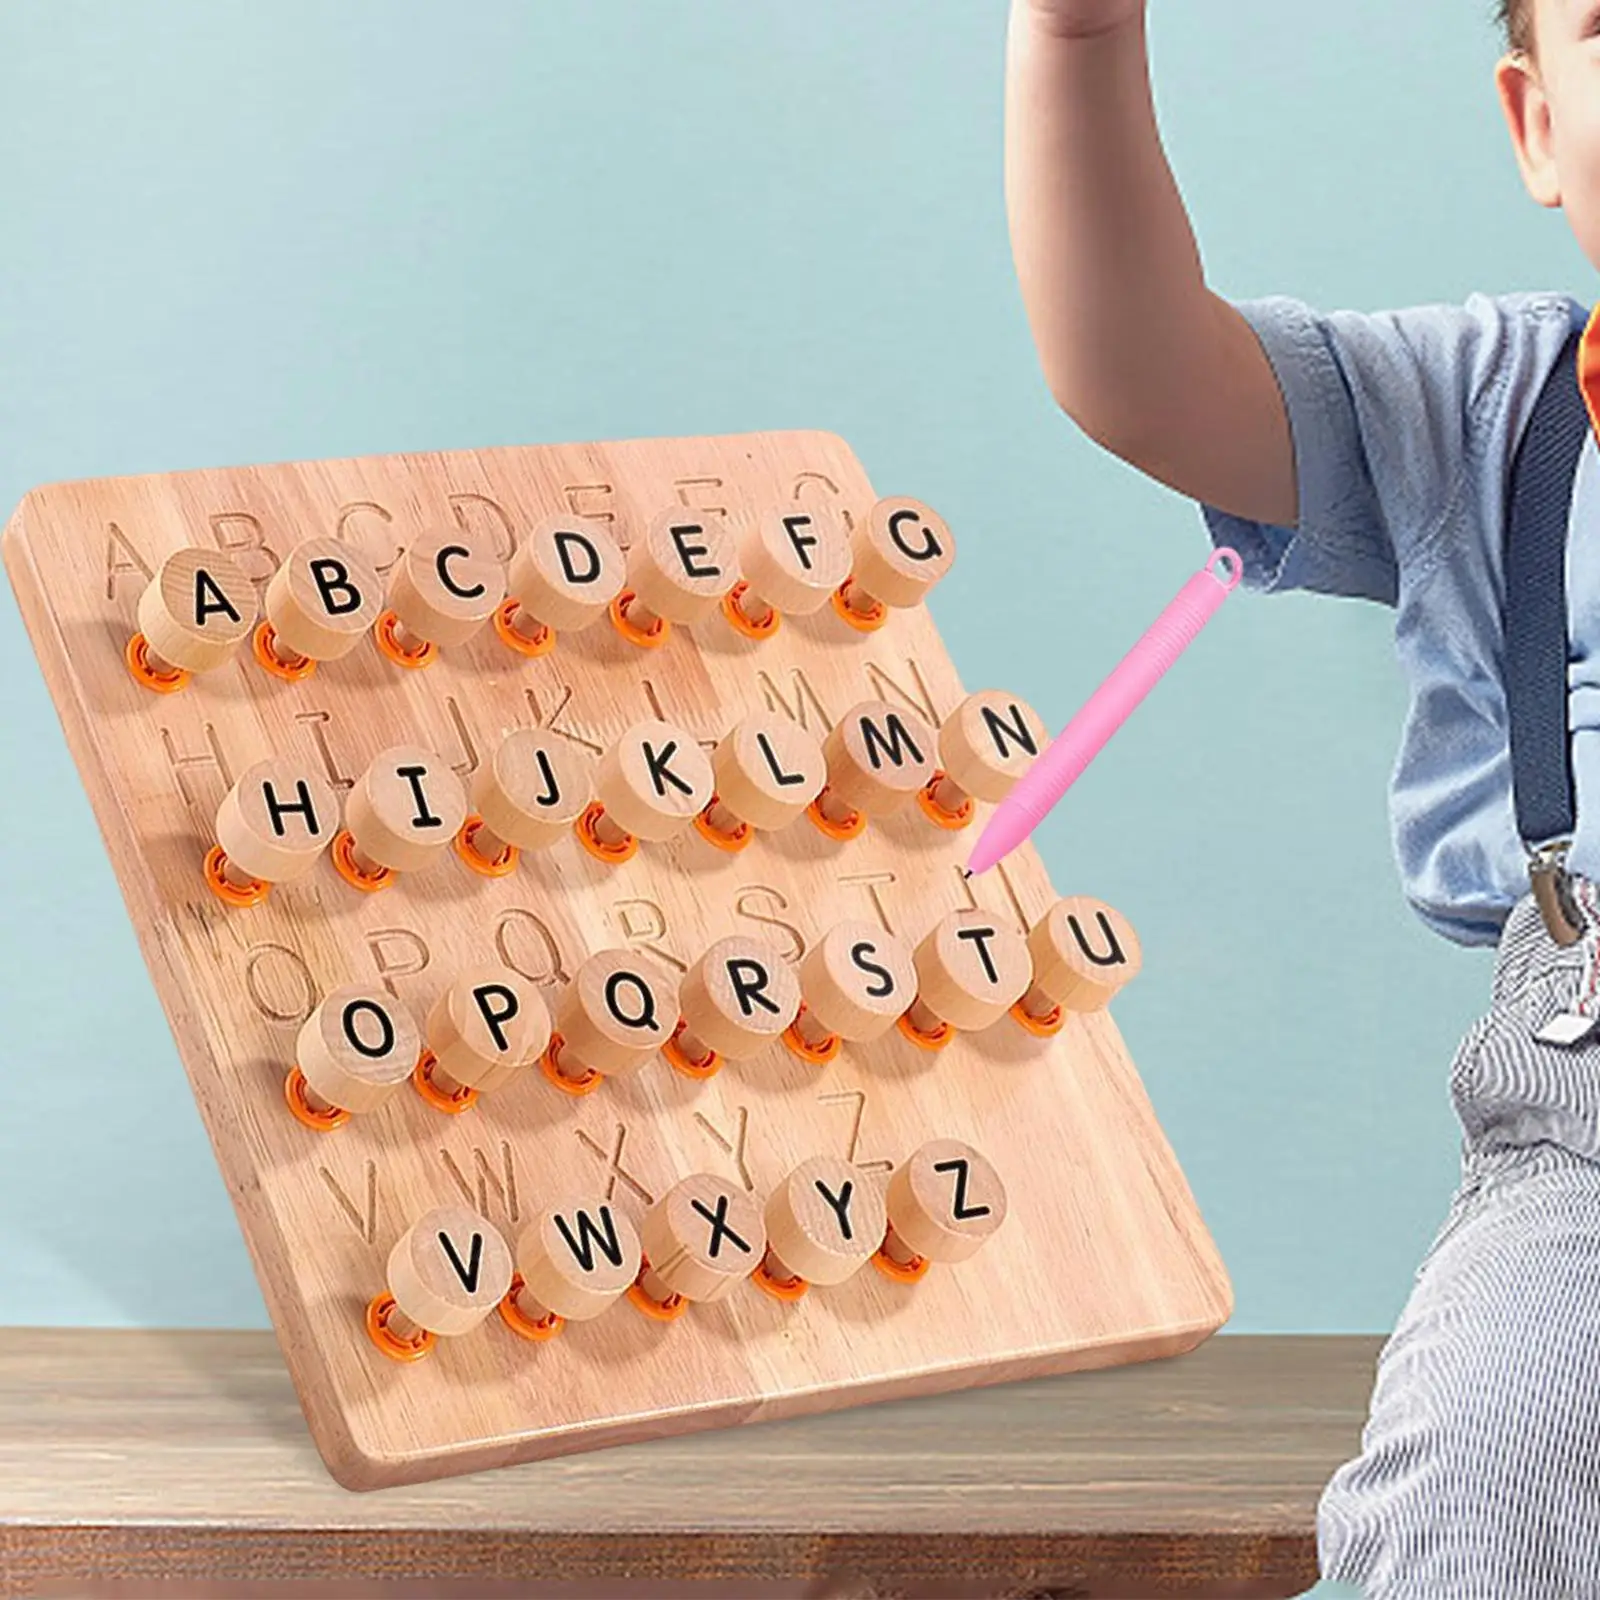 Wooden Alphabet Tracing Board Educational Writing Aids Board Game Letters Puzzles for gift Children Girls 3+ Years Kids